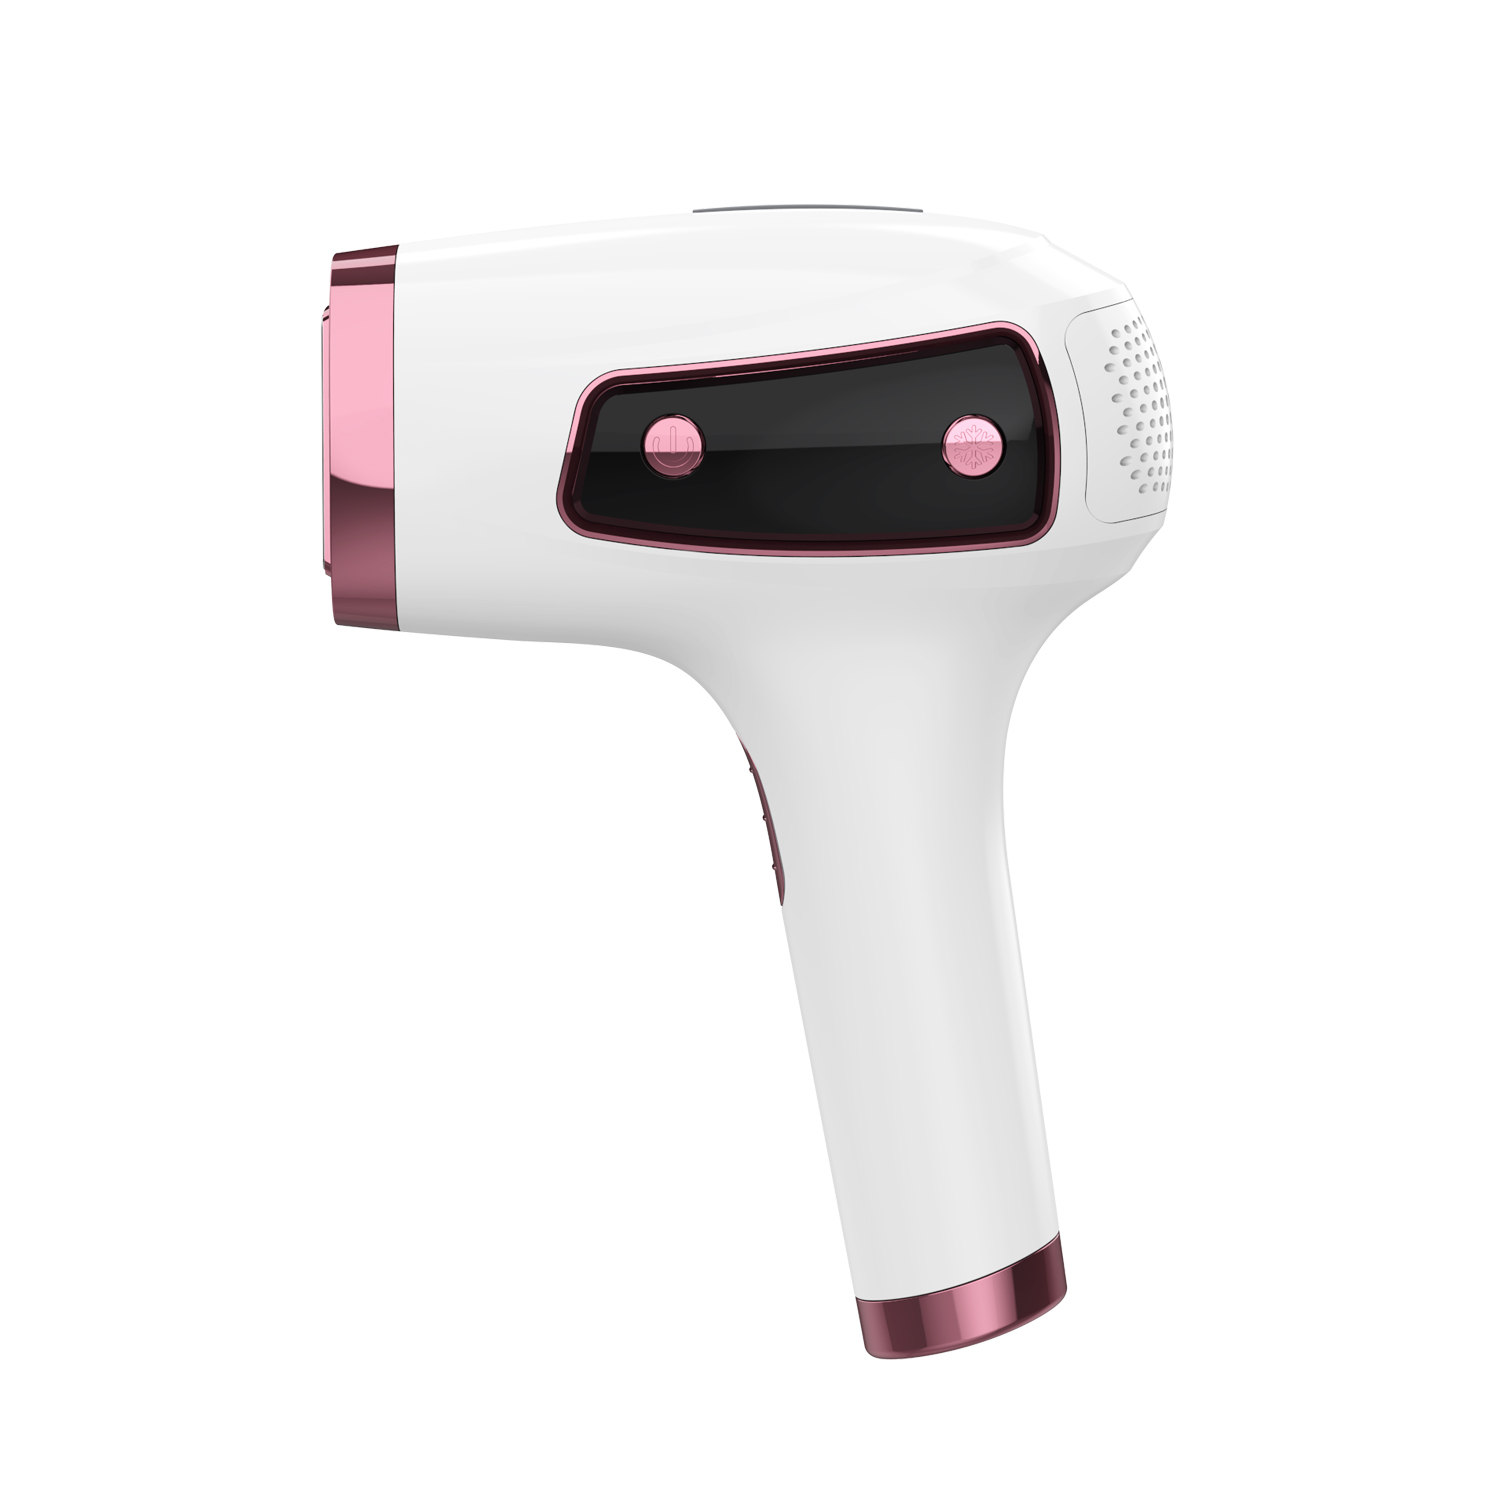 Ipl Home Use Hair Removal Ice Cooling Home Use Ipl Hair Removal Device Hair Removal For Women Whole Body 